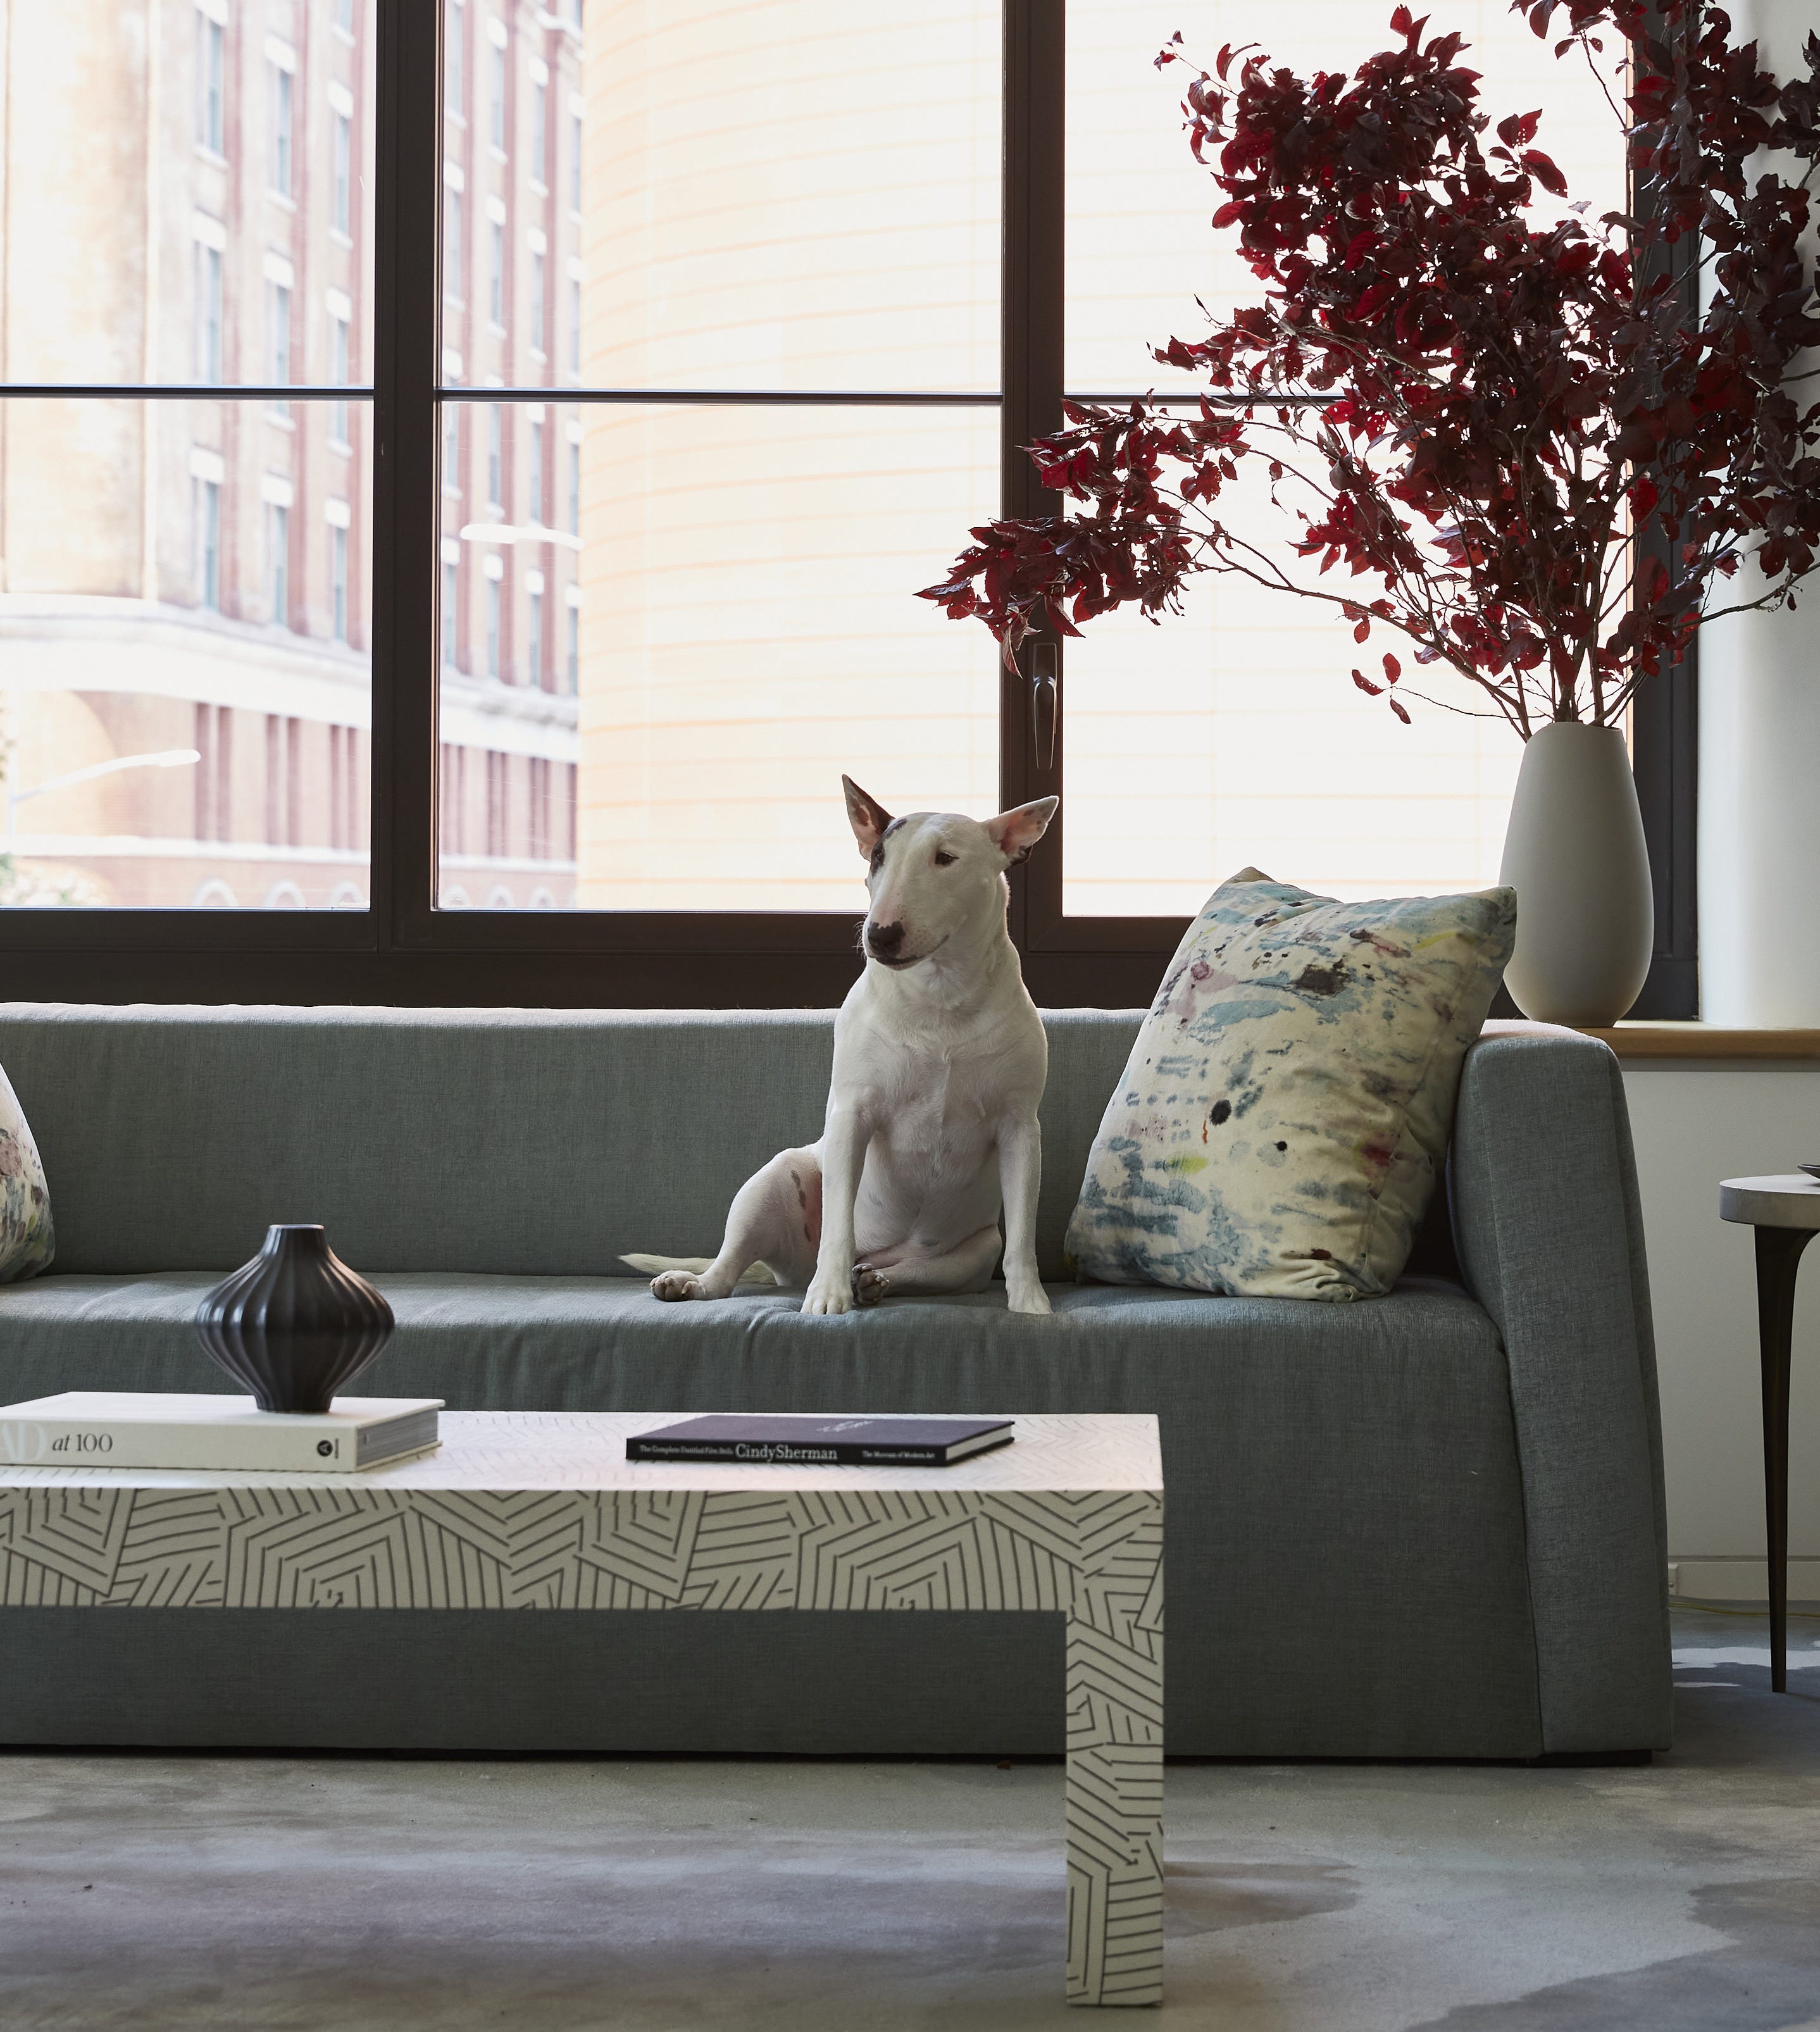 In This Chic Manhattan Pad, Everyone Has a Place—Including the Family Dog